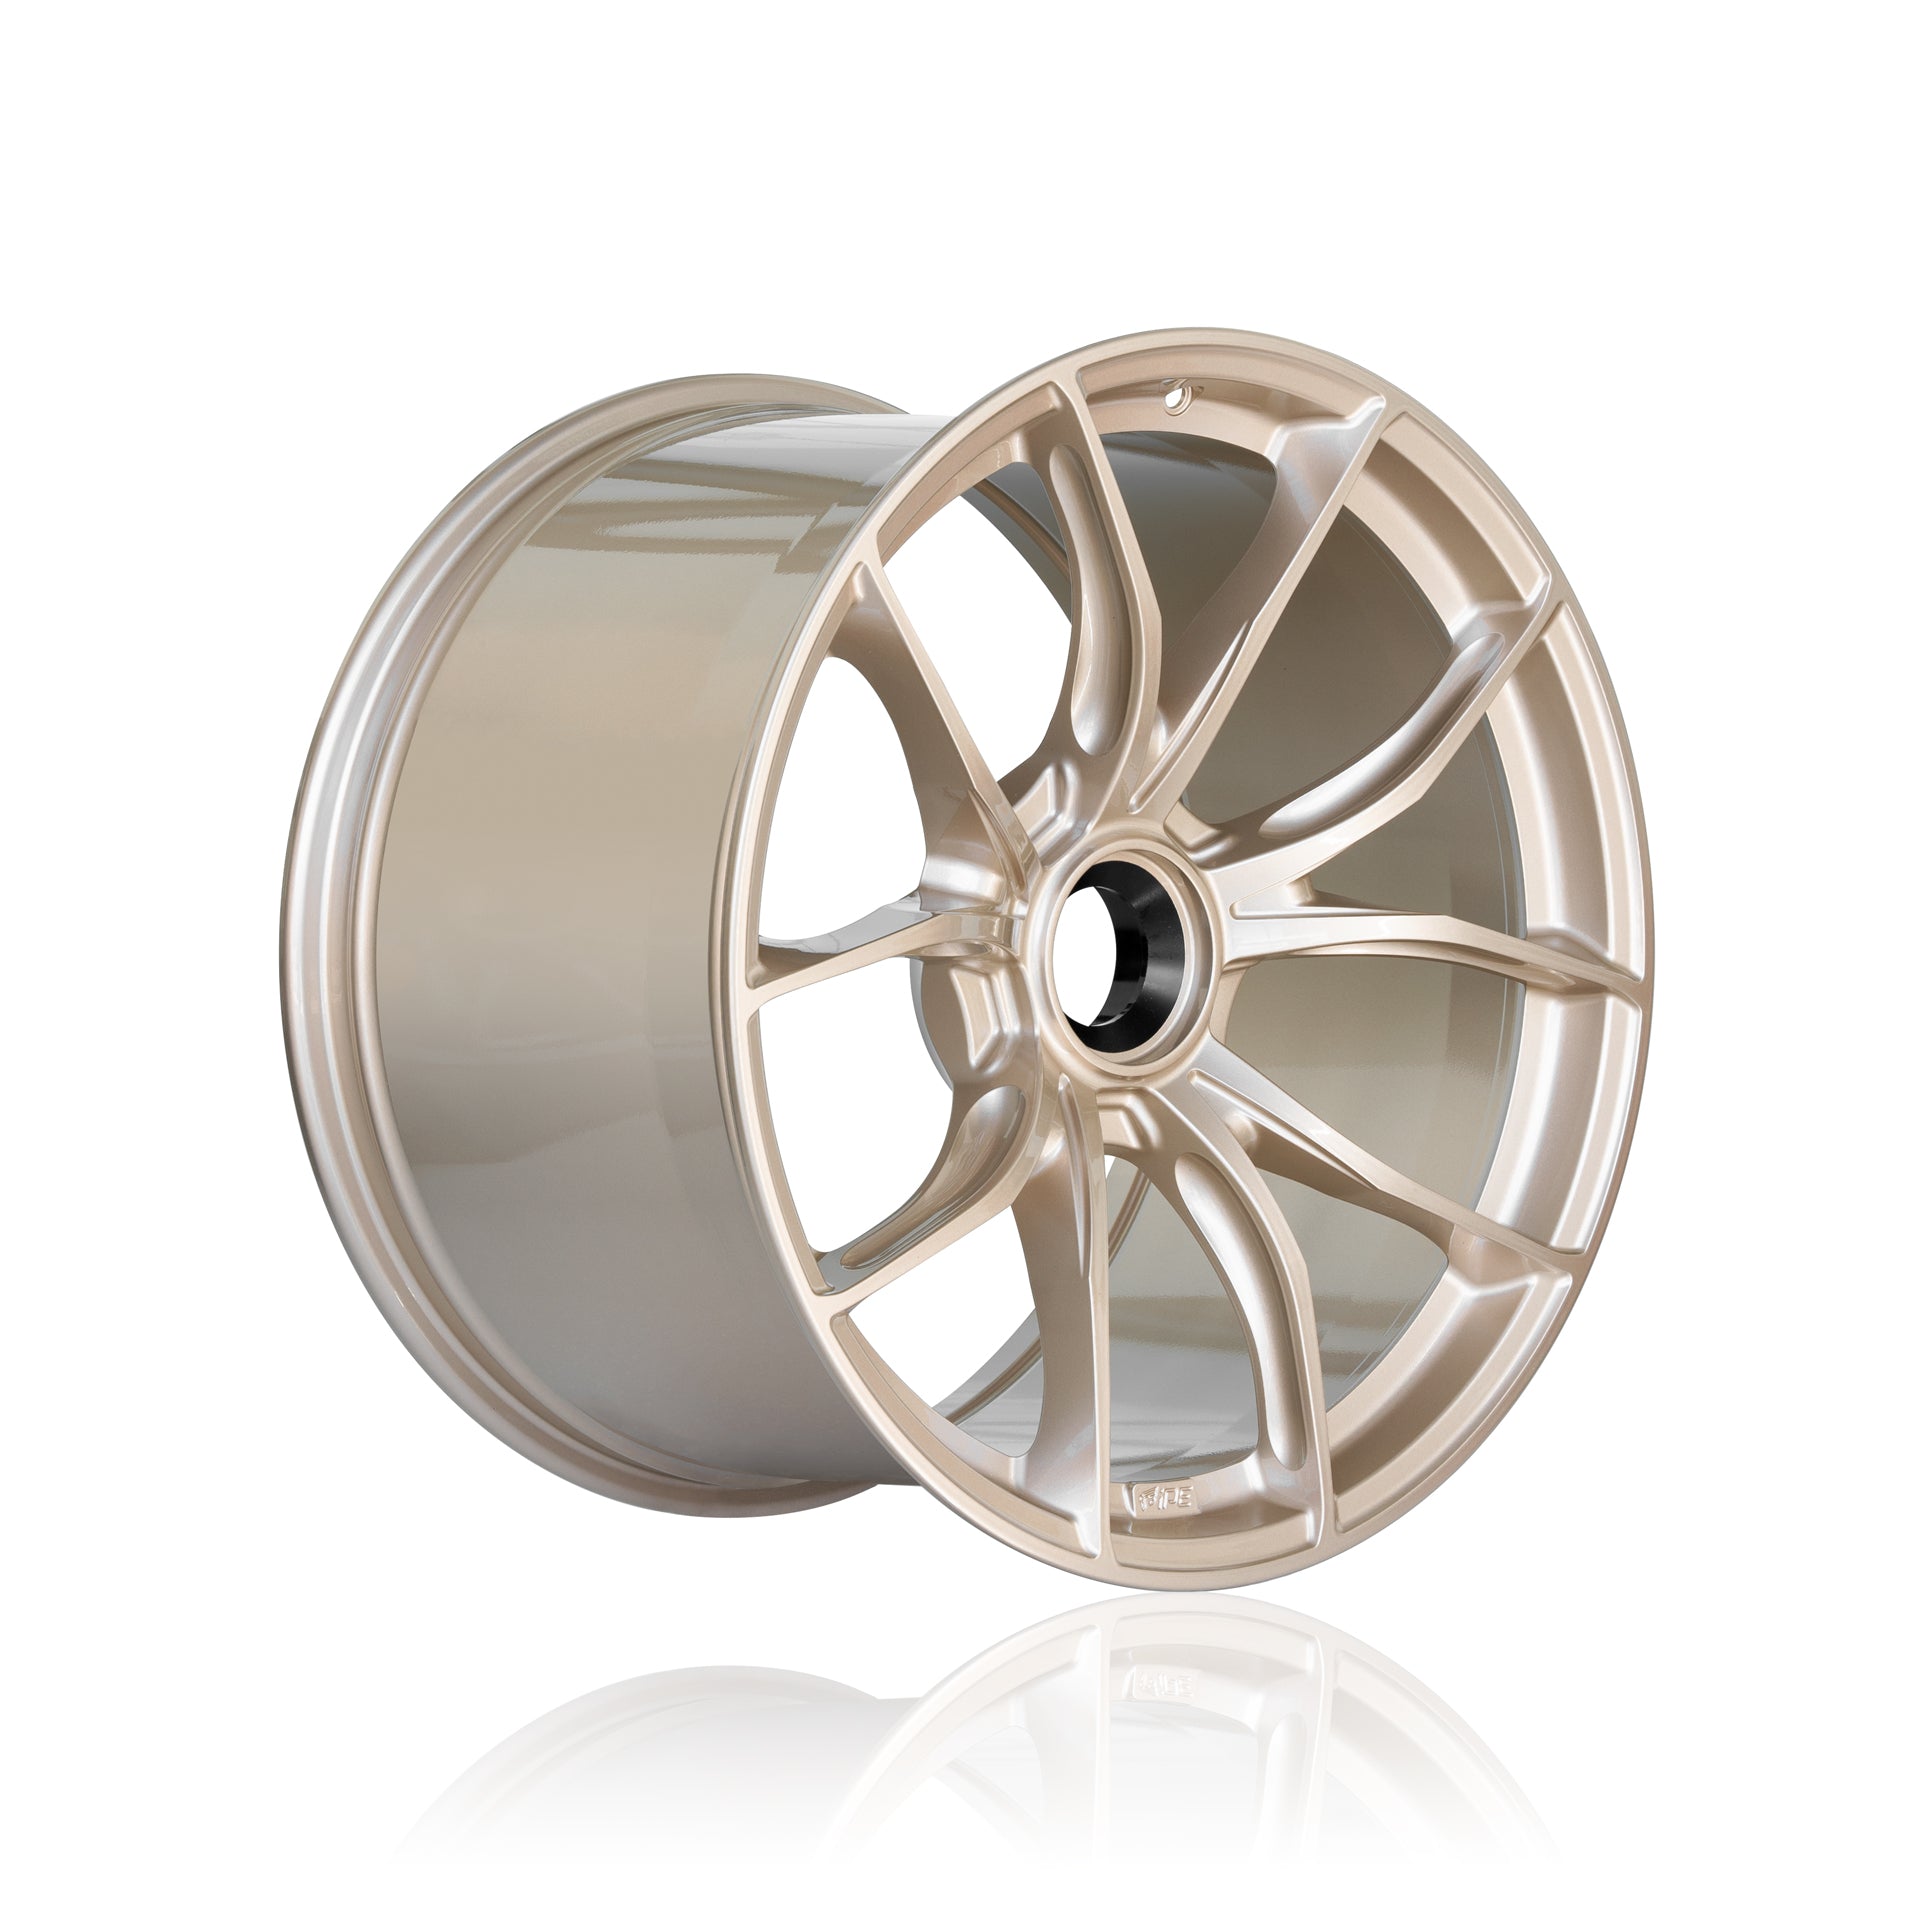 Offset front view of a light bronze IPE MFR-01 Magnesium wheel on a white background